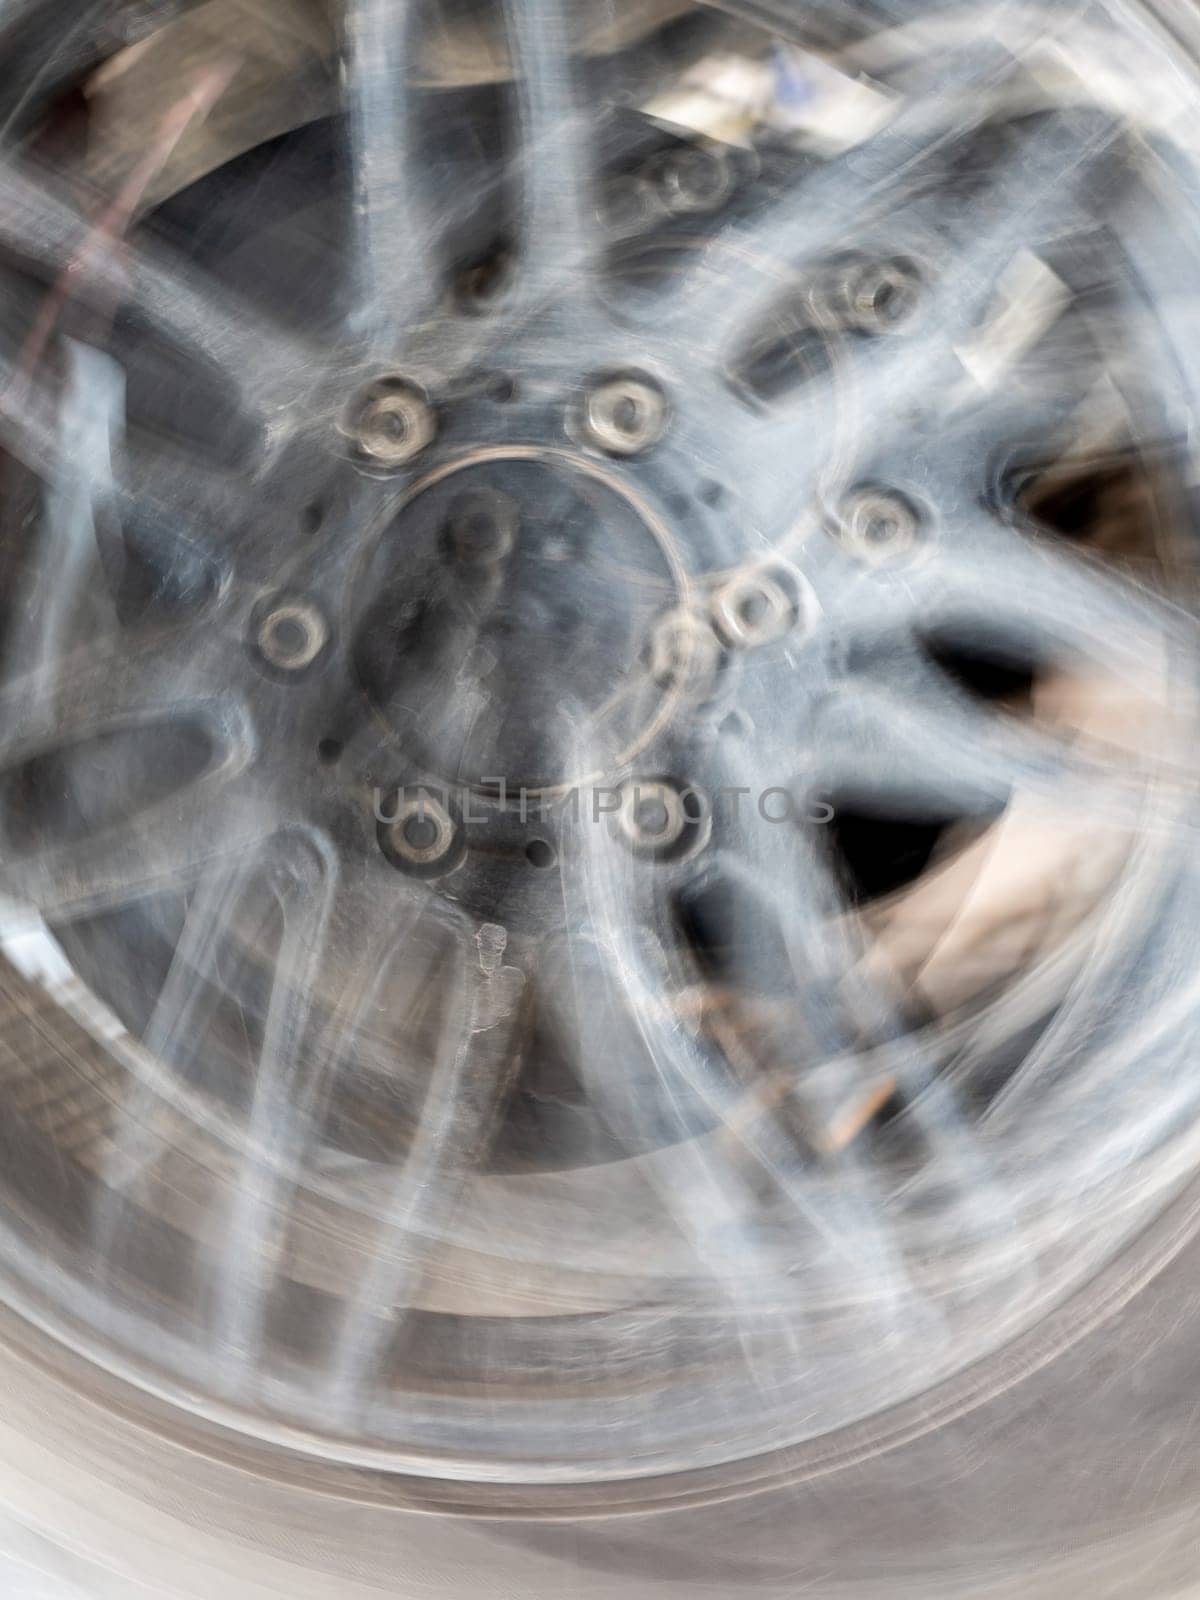 The motion blurred image of the vehicle wheel by Satakorn